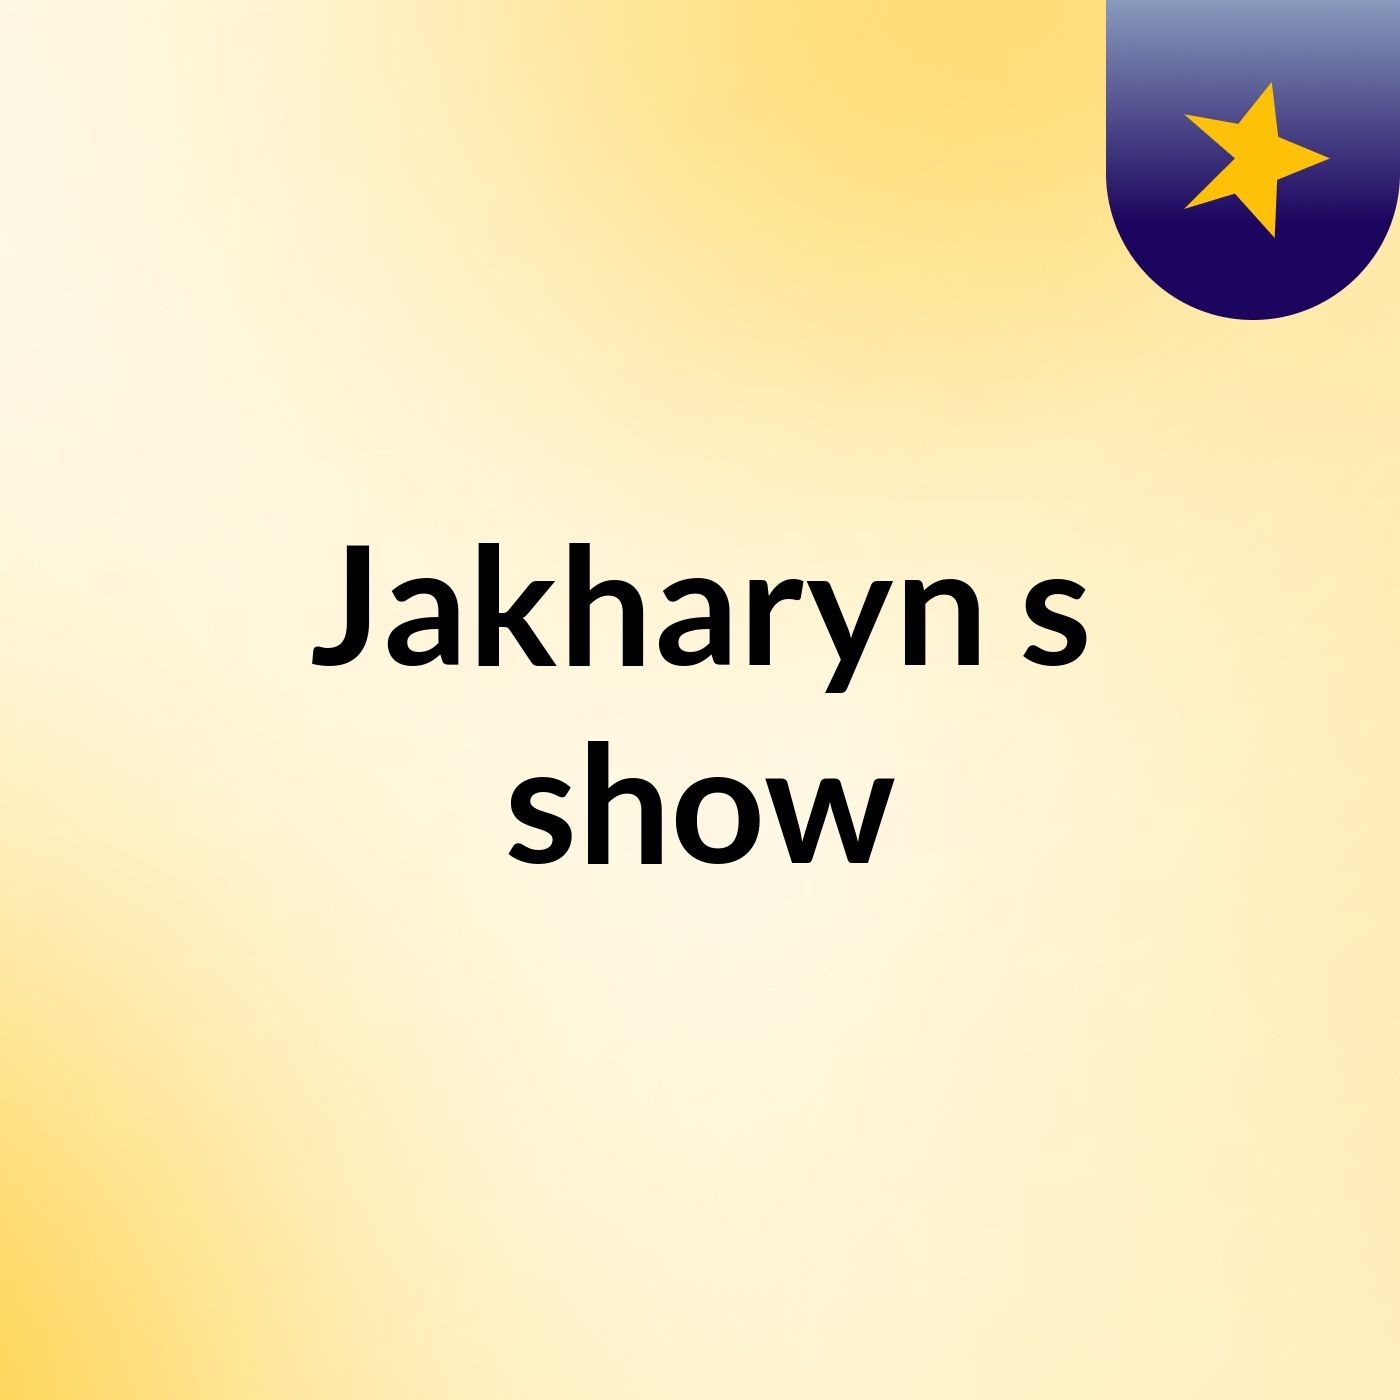 Jakharyn's show